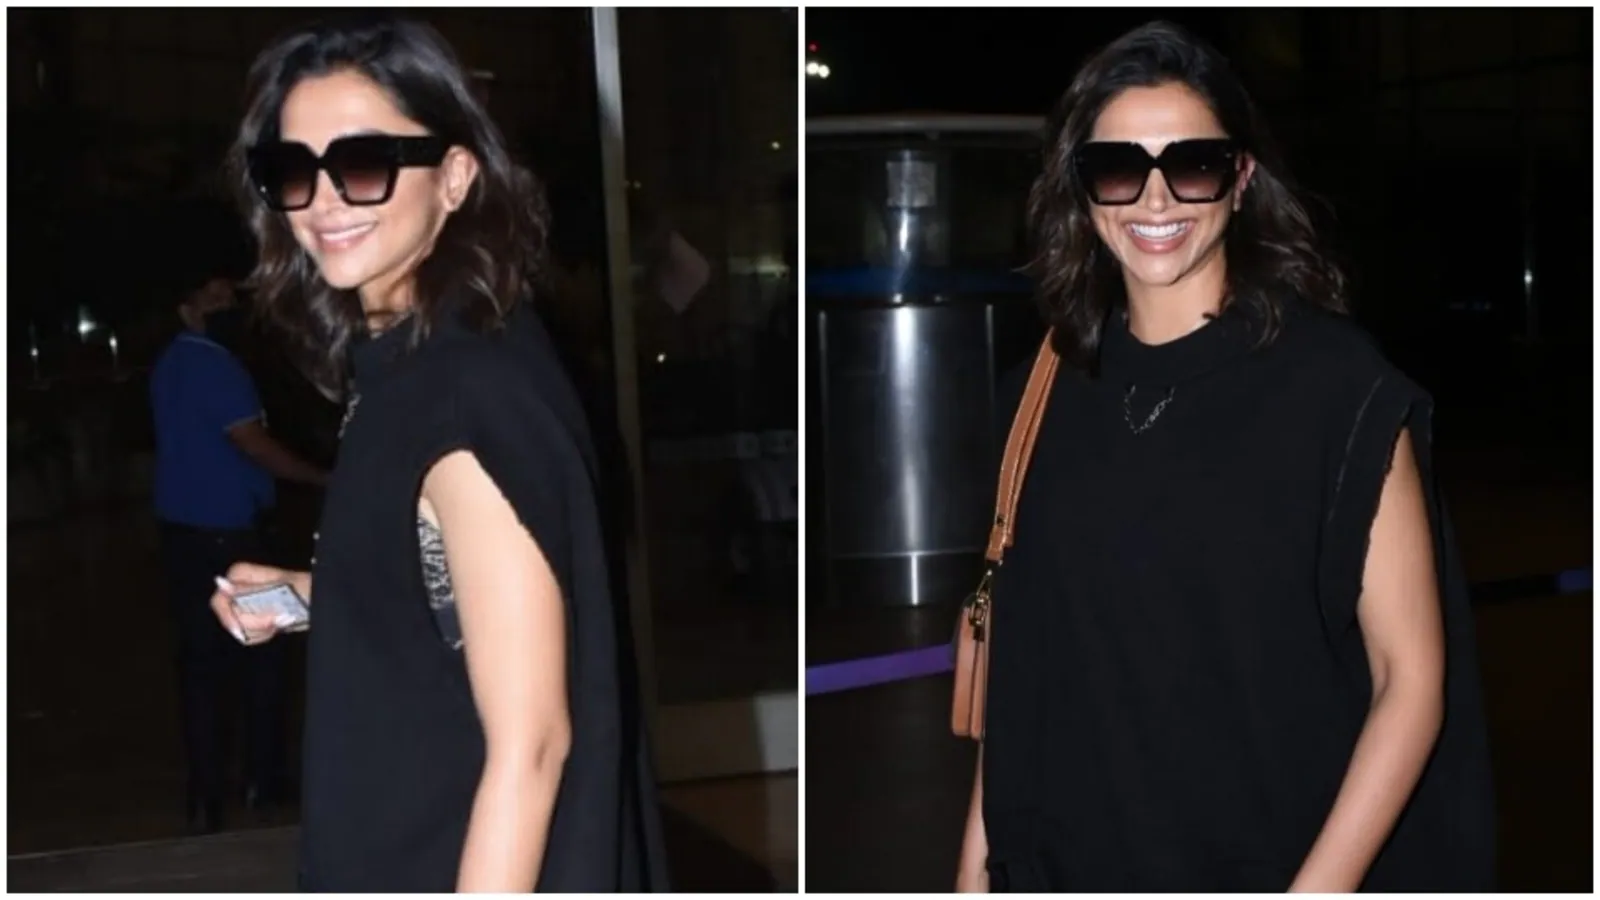 Deepika Padukone wins the airport fashion crown with edgy all-black look and printed bralette: Check out pics, video